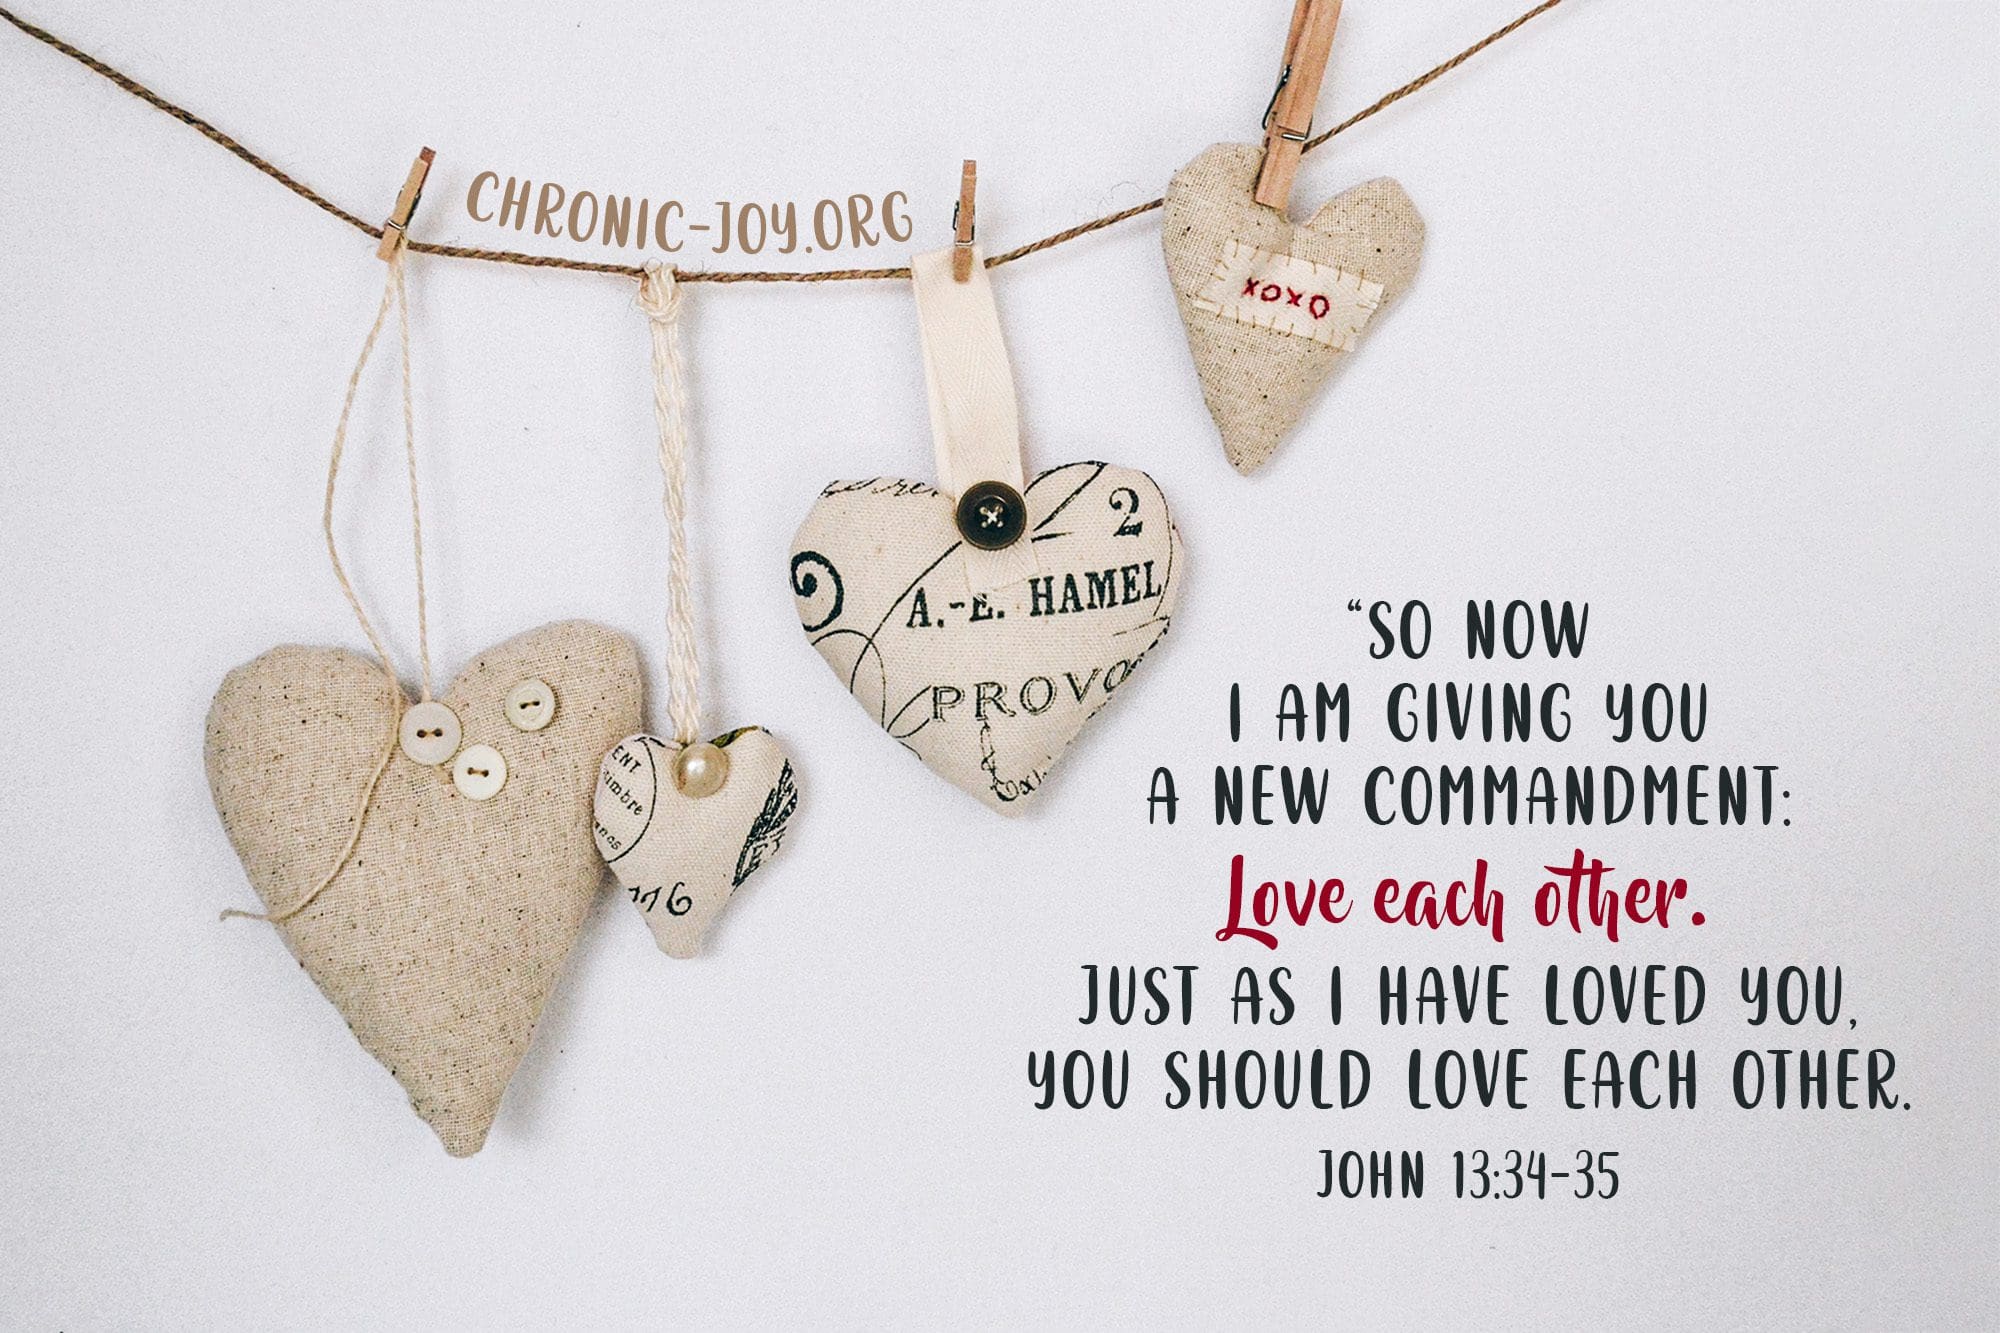 “So now I am giving you a new commandment: Love each other. Just as I have loved you, you should love each other." John 13:34-35